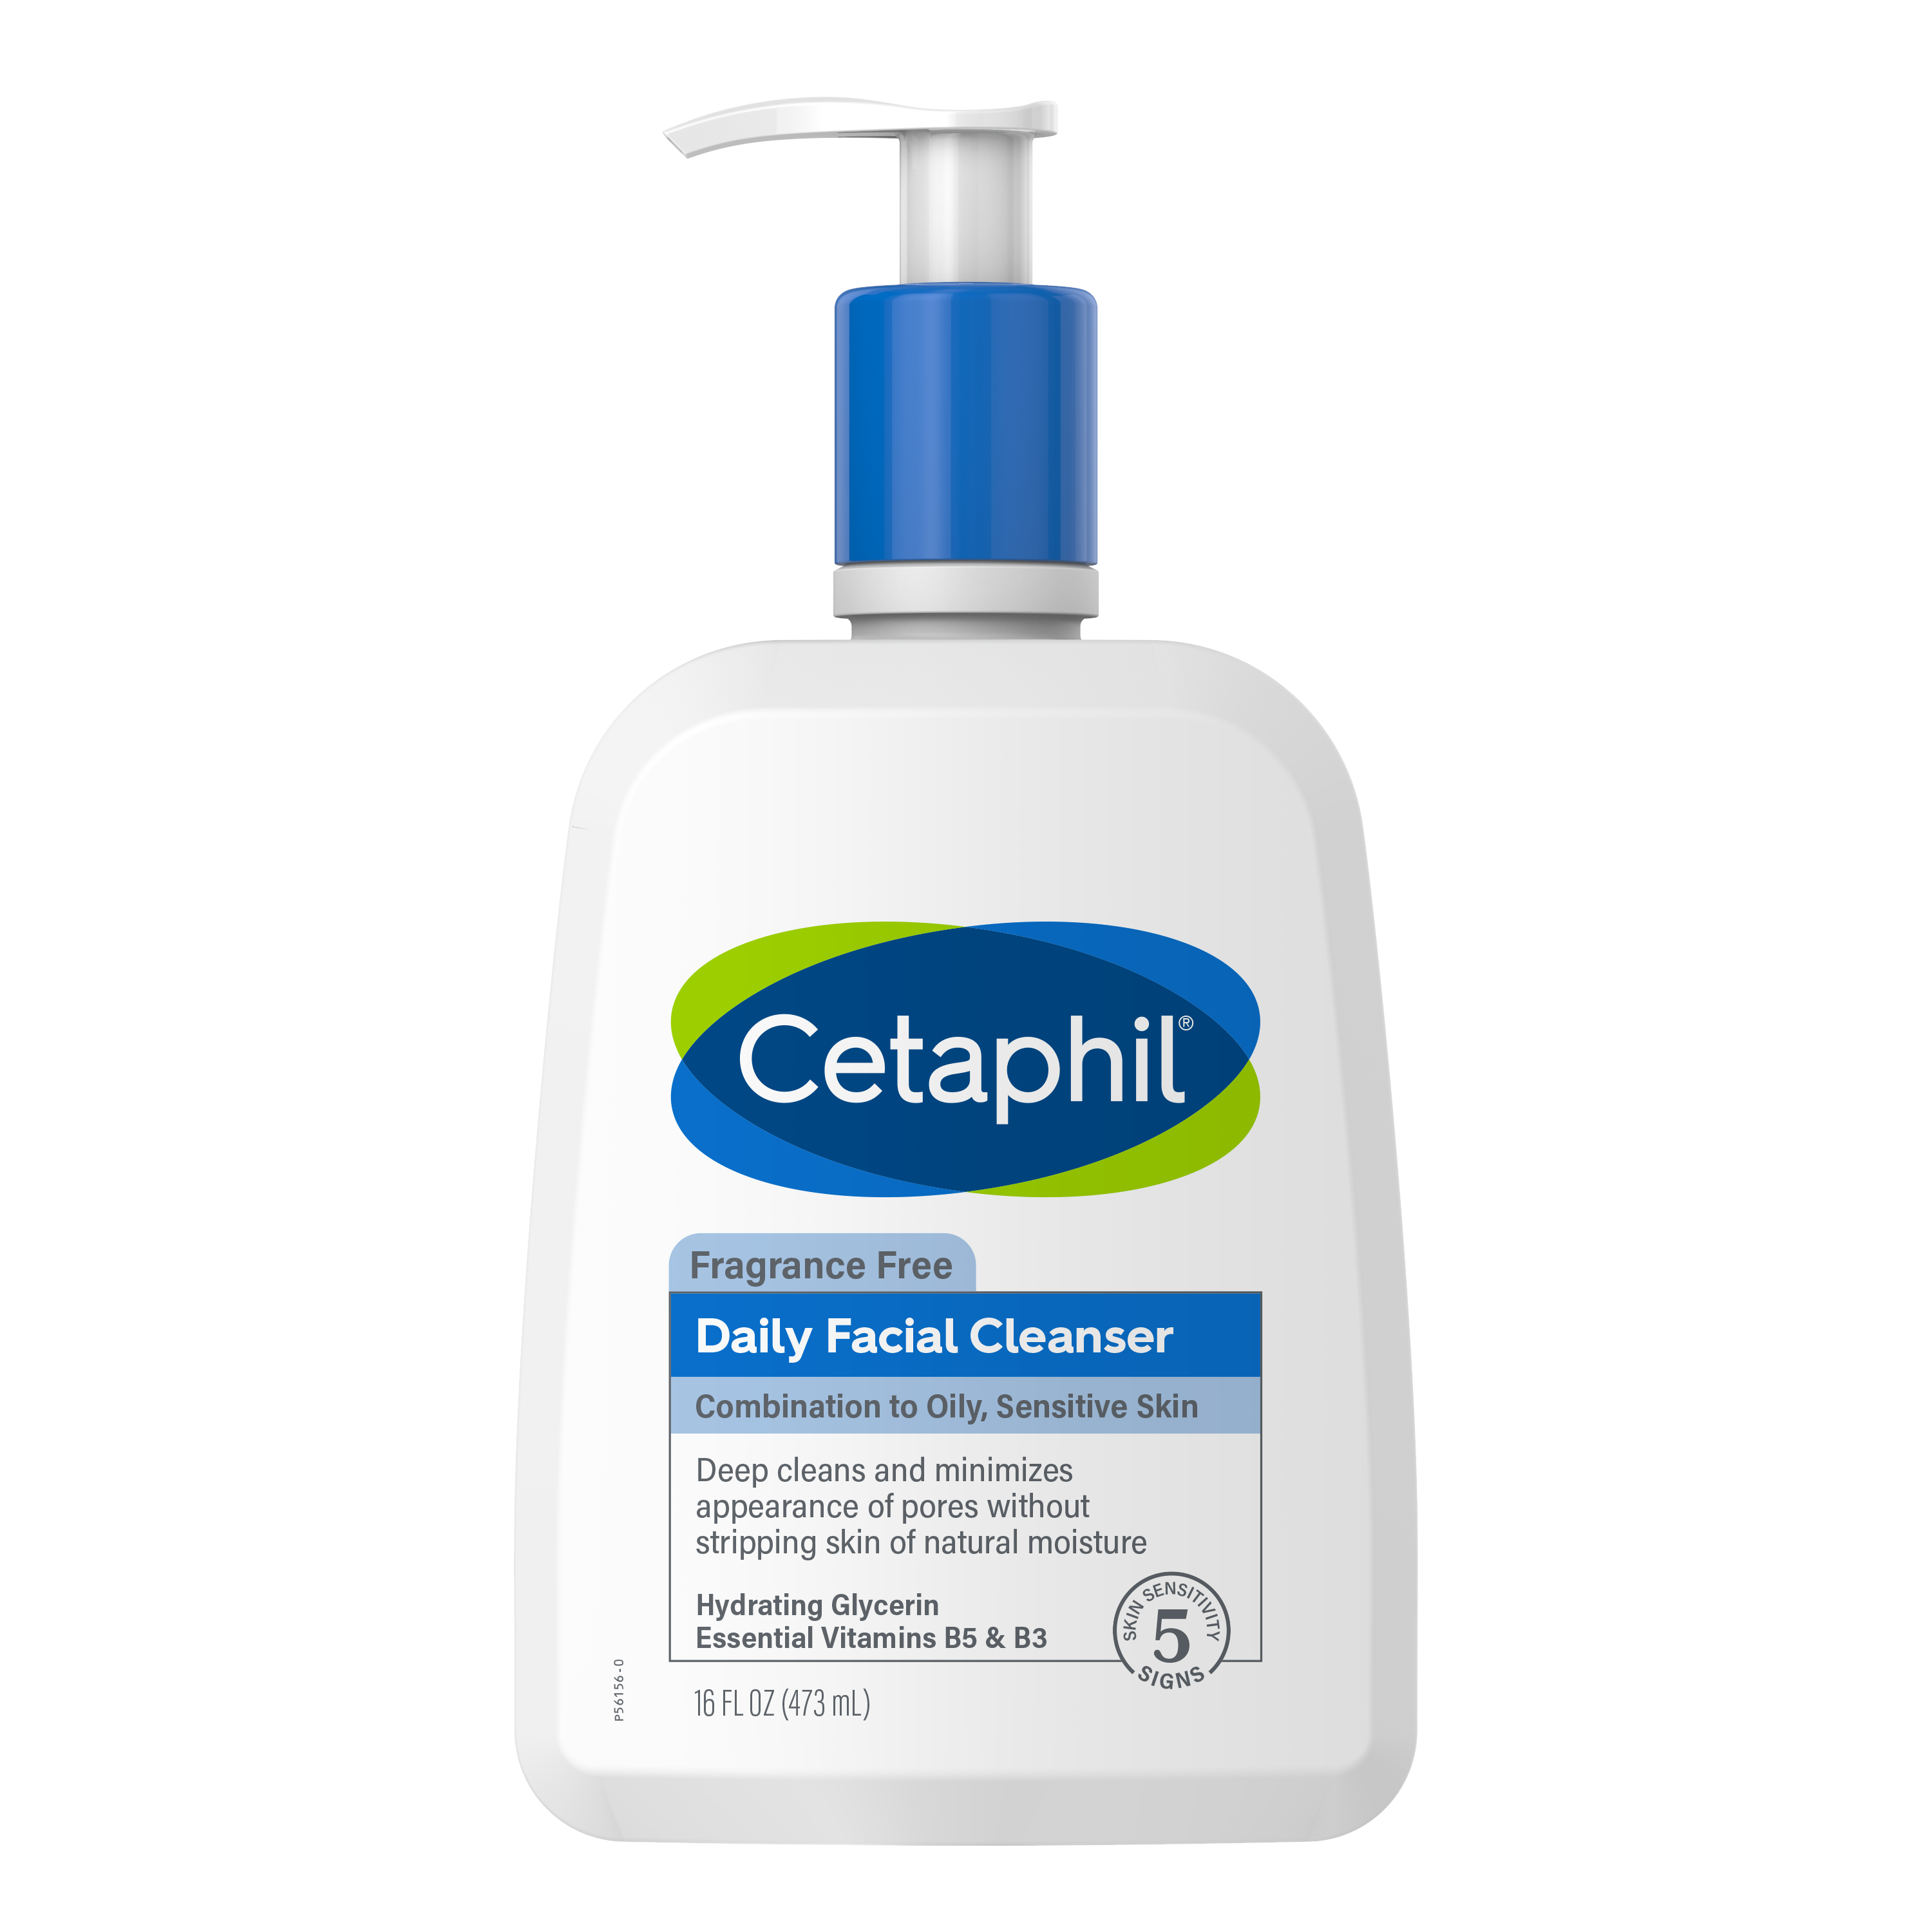 Daily Facial Cleanser Fragrance Free